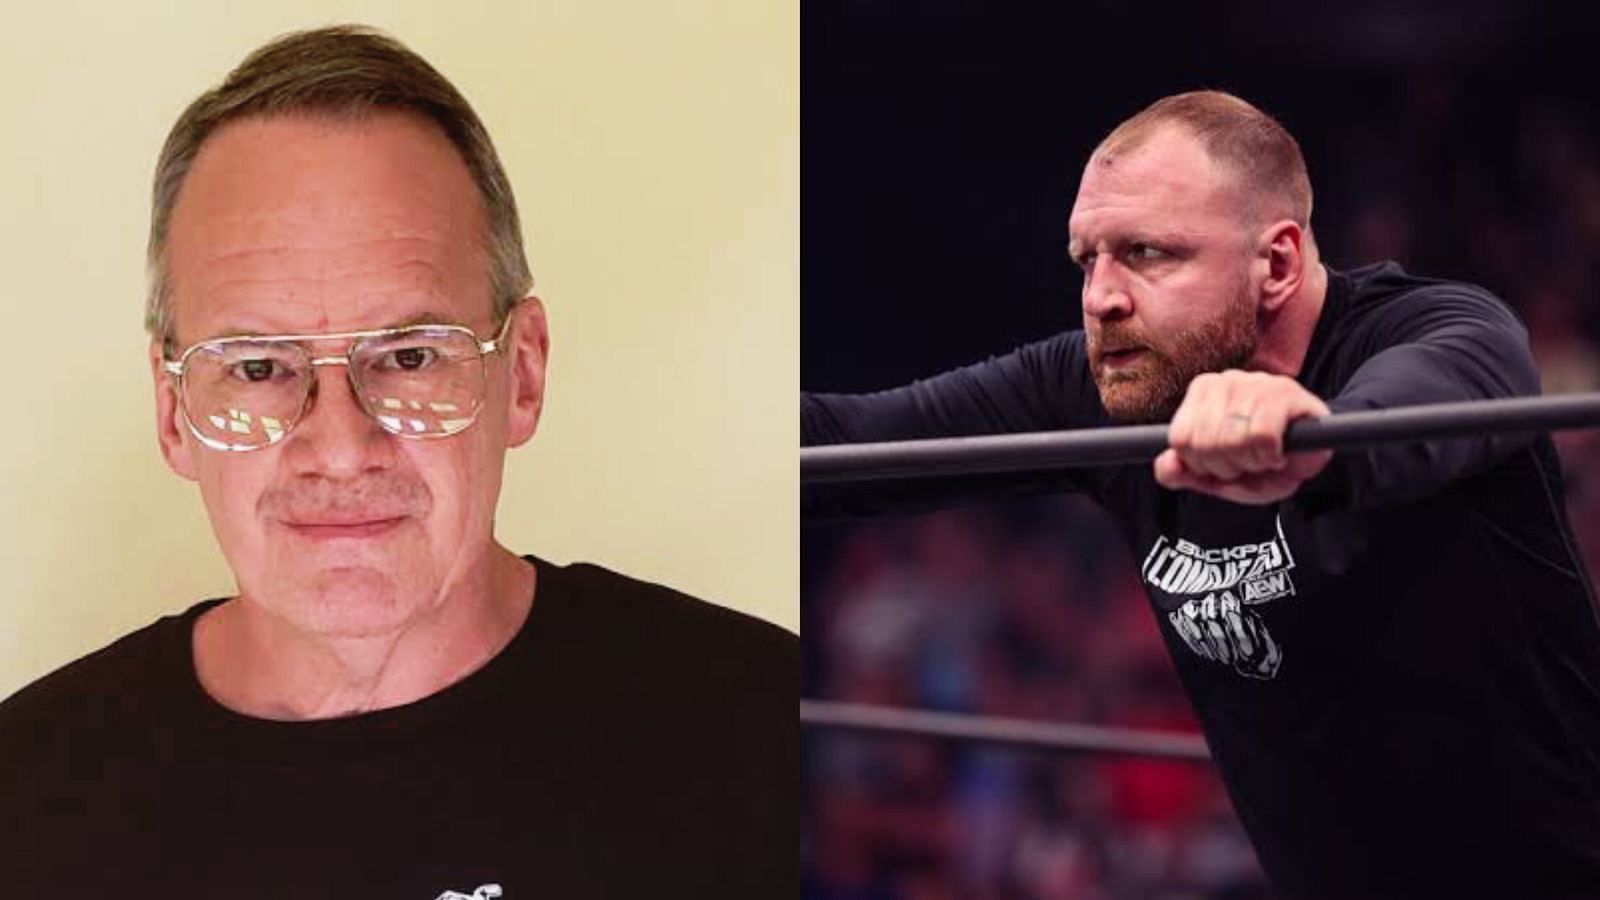 Jim Cornette recently took multiple shots at Jon Moxley